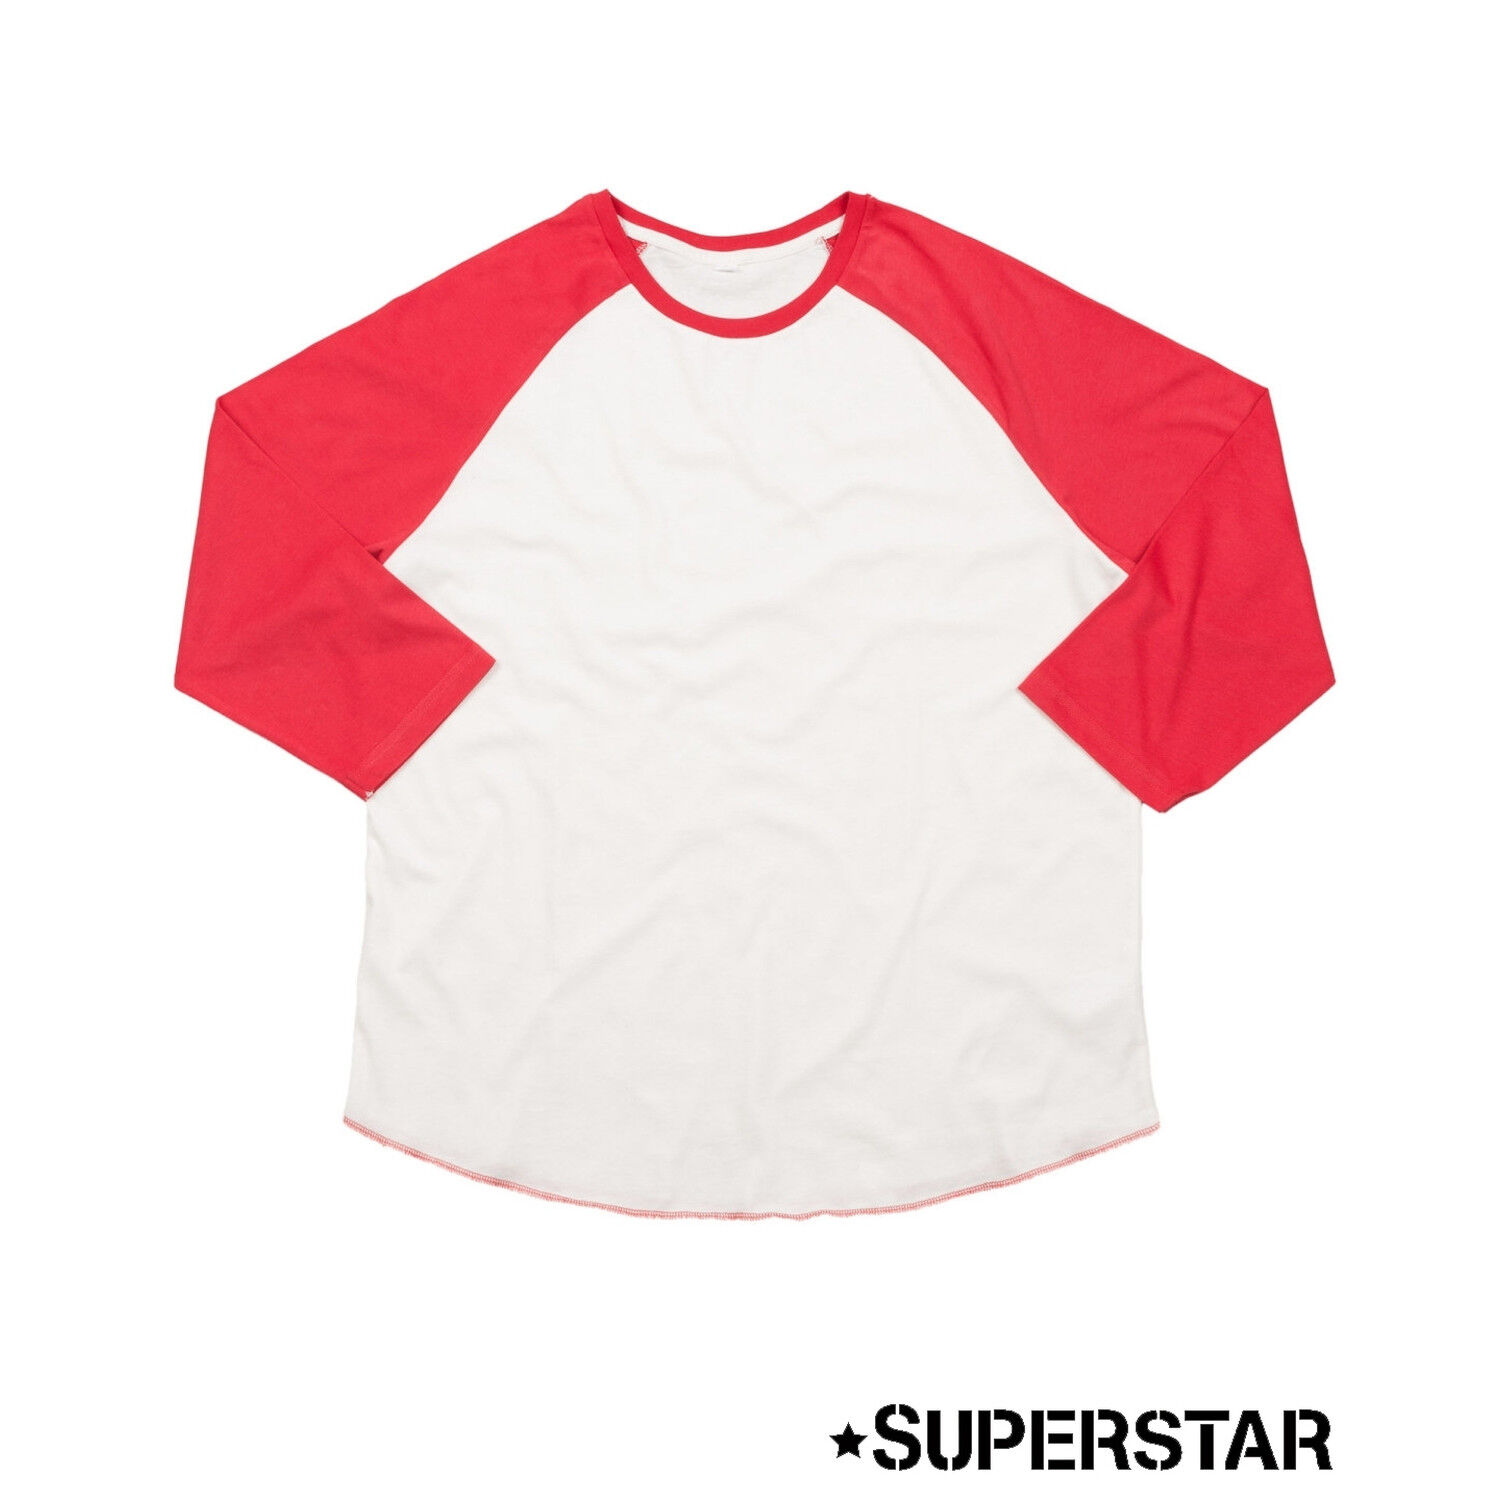 Superstar Baseball Shirt (washed white and warm red)